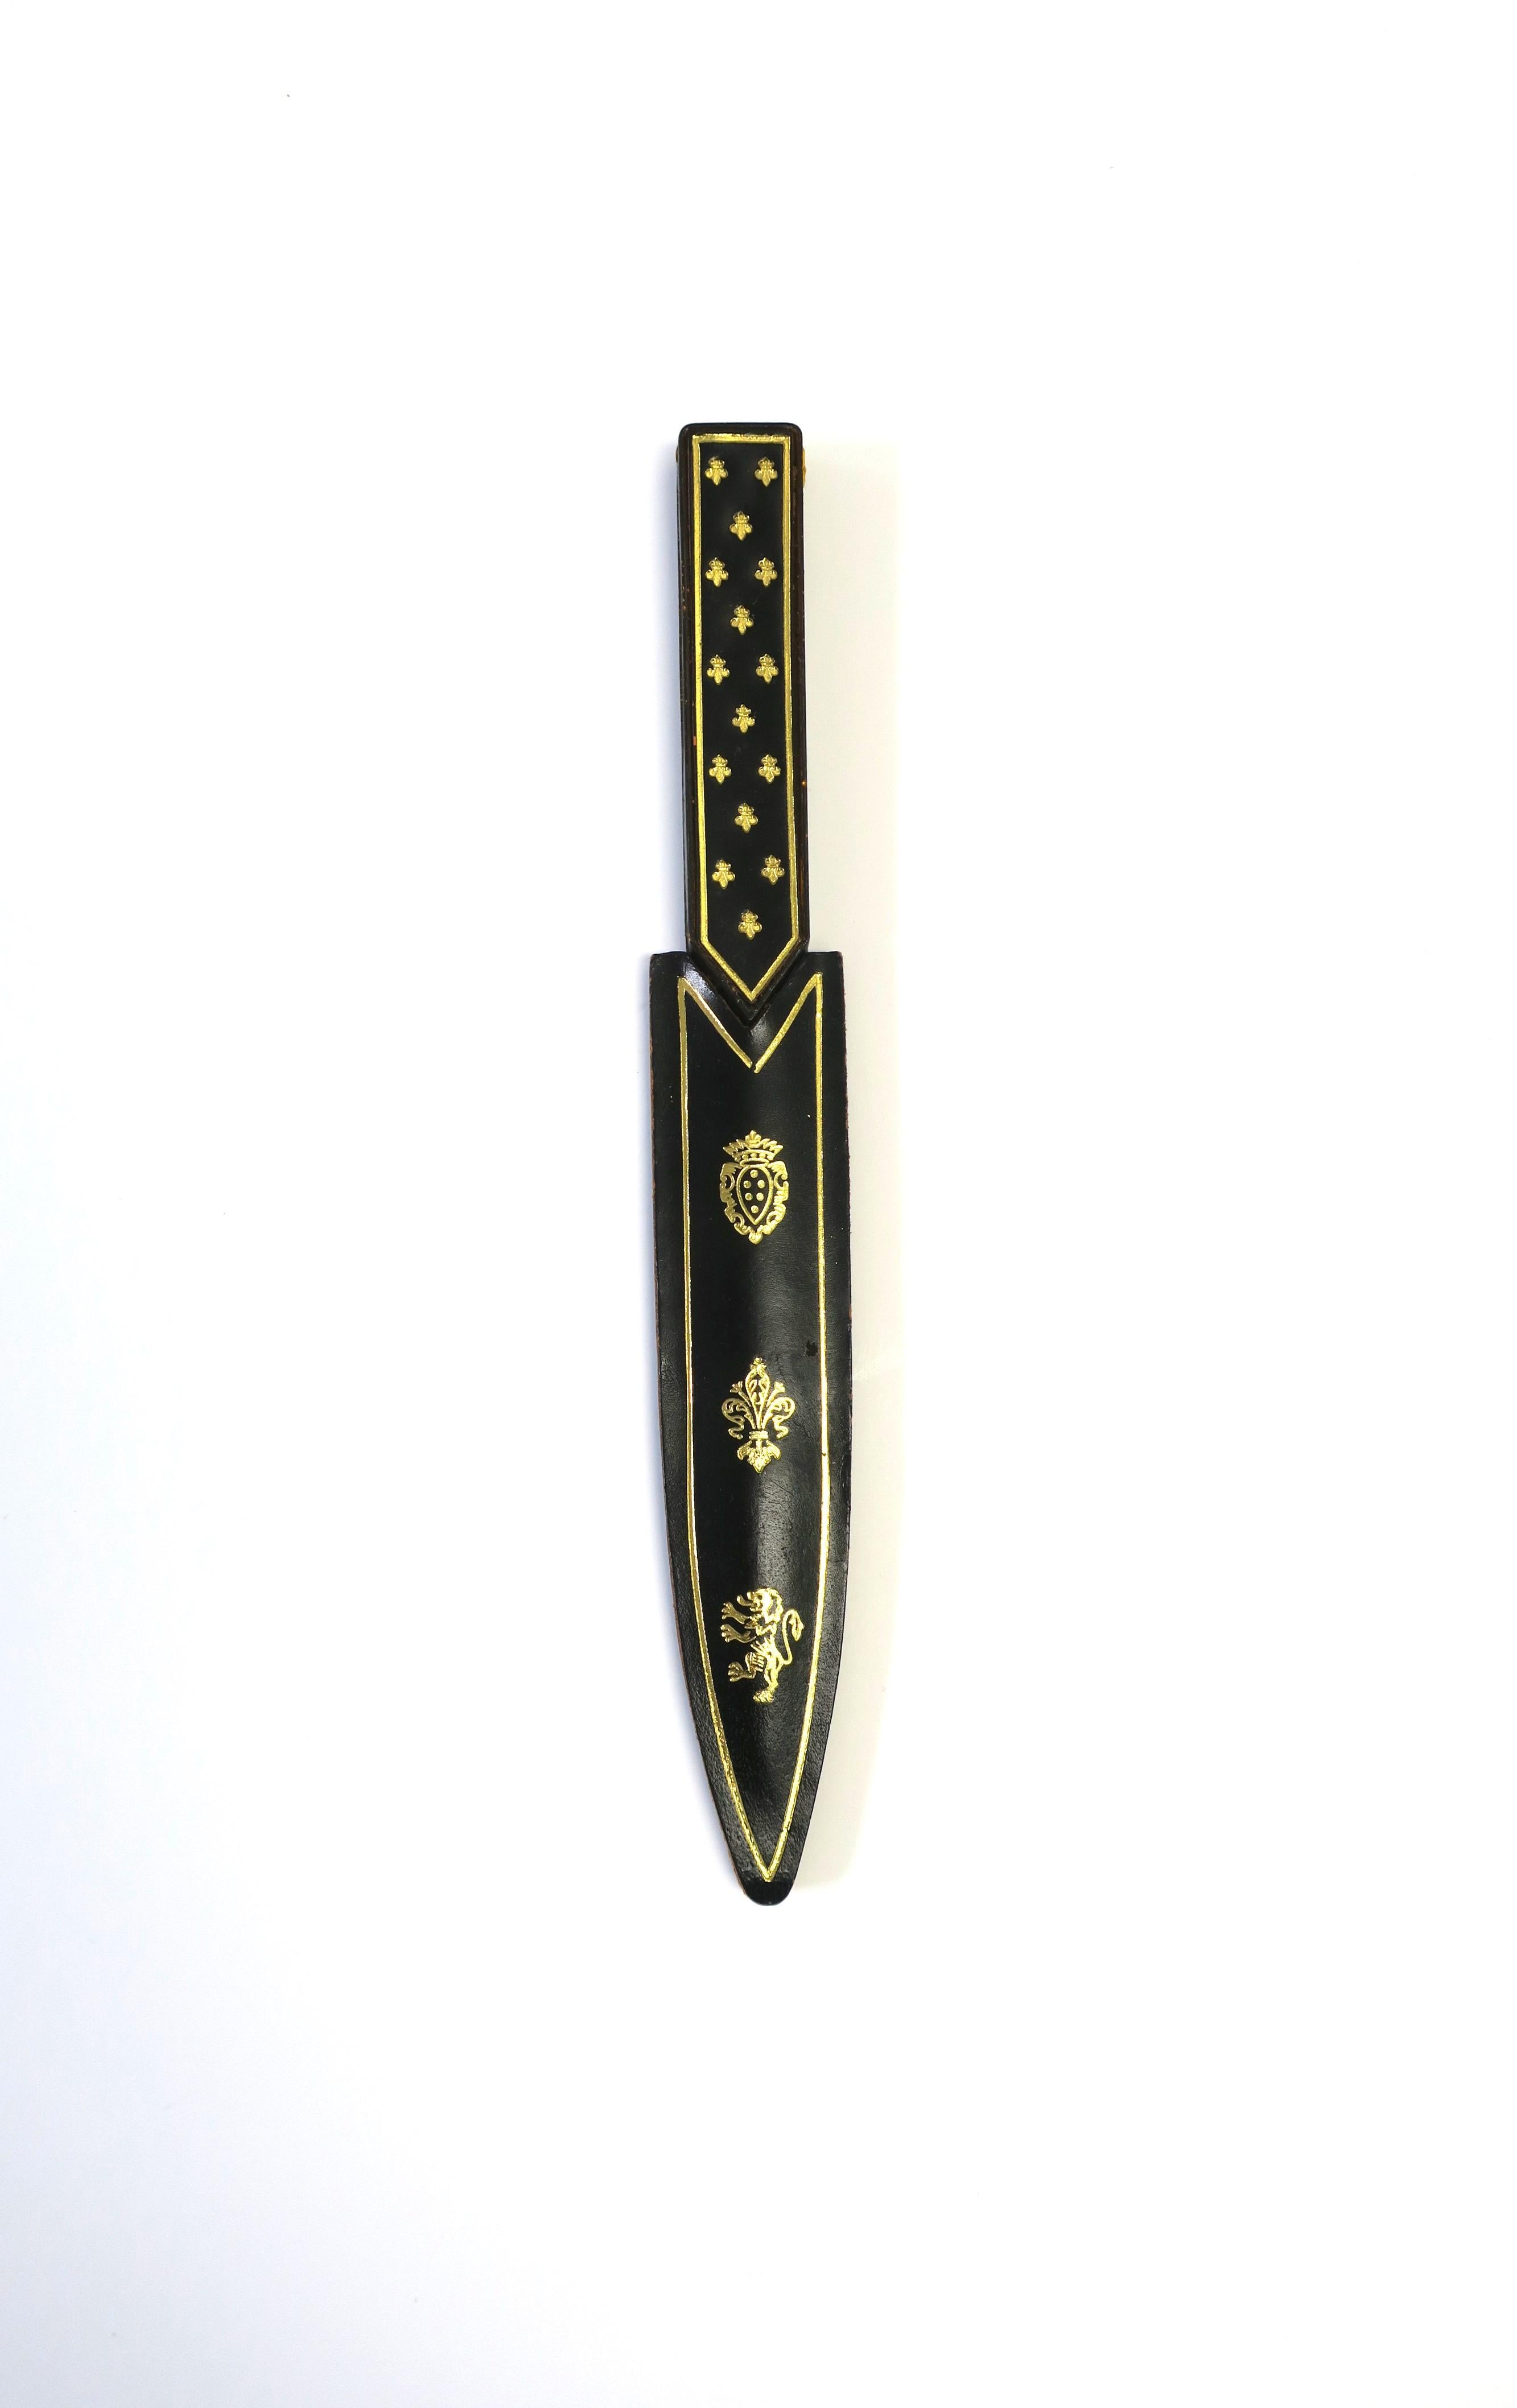 An Italian leather gold embossed and resin letter opener, circa mid-20th century, Italy. Piece is black leather with gold embossed regal design and a translucent brown knife opener. Marked 'Made Italy' on acrylic/resin knife area, near handle, as